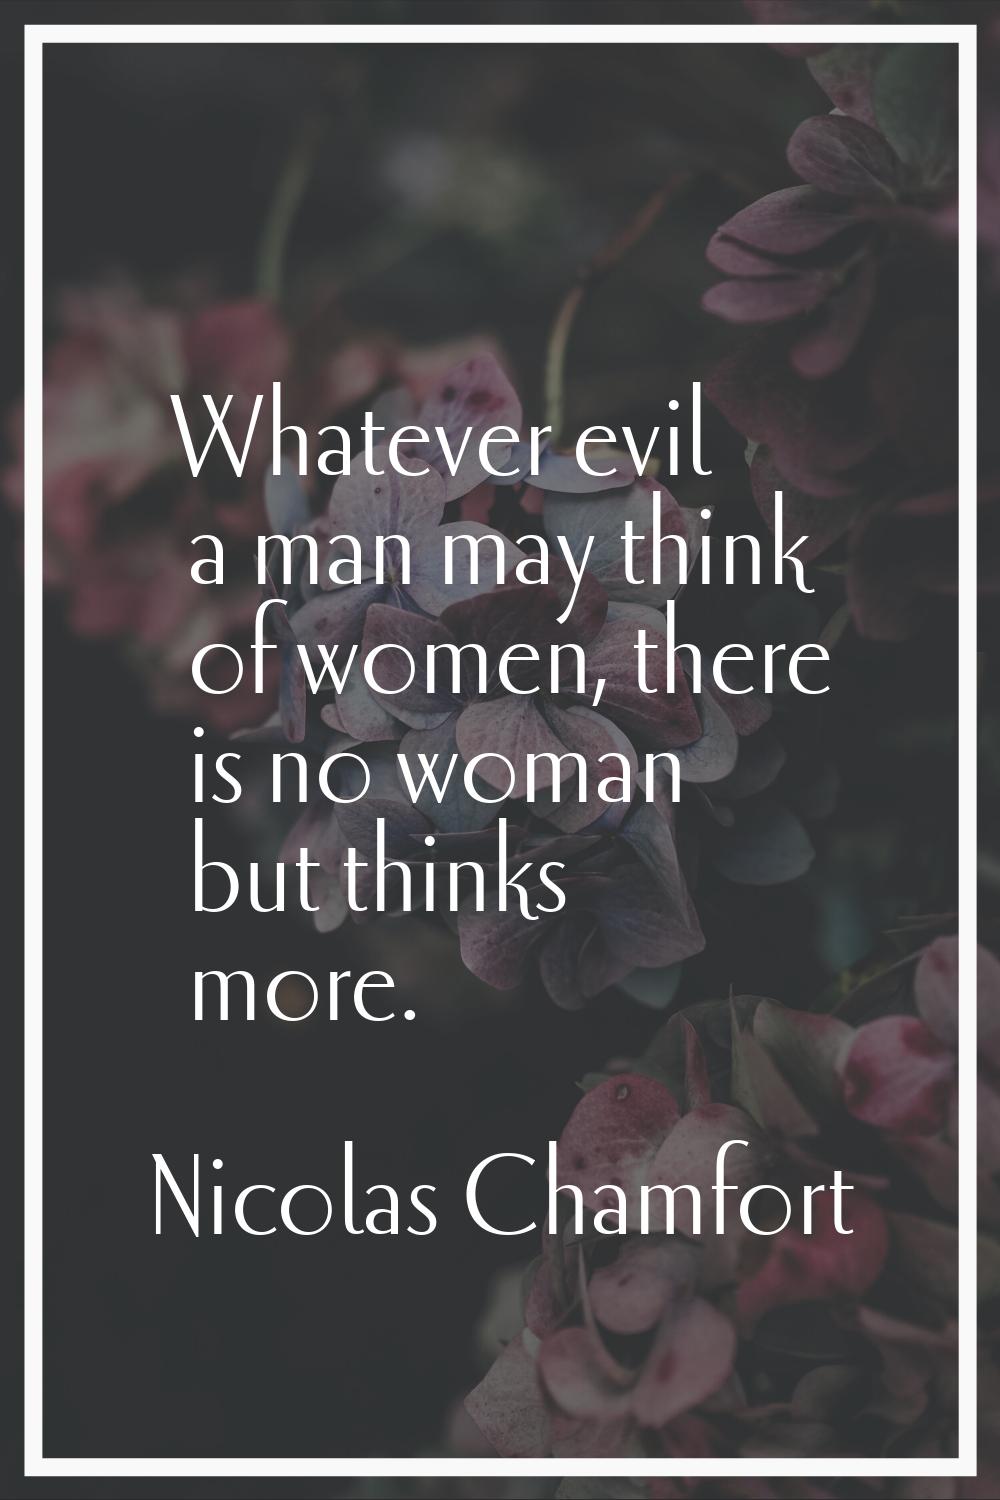 Whatever evil a man may think of women, there is no woman but thinks more.